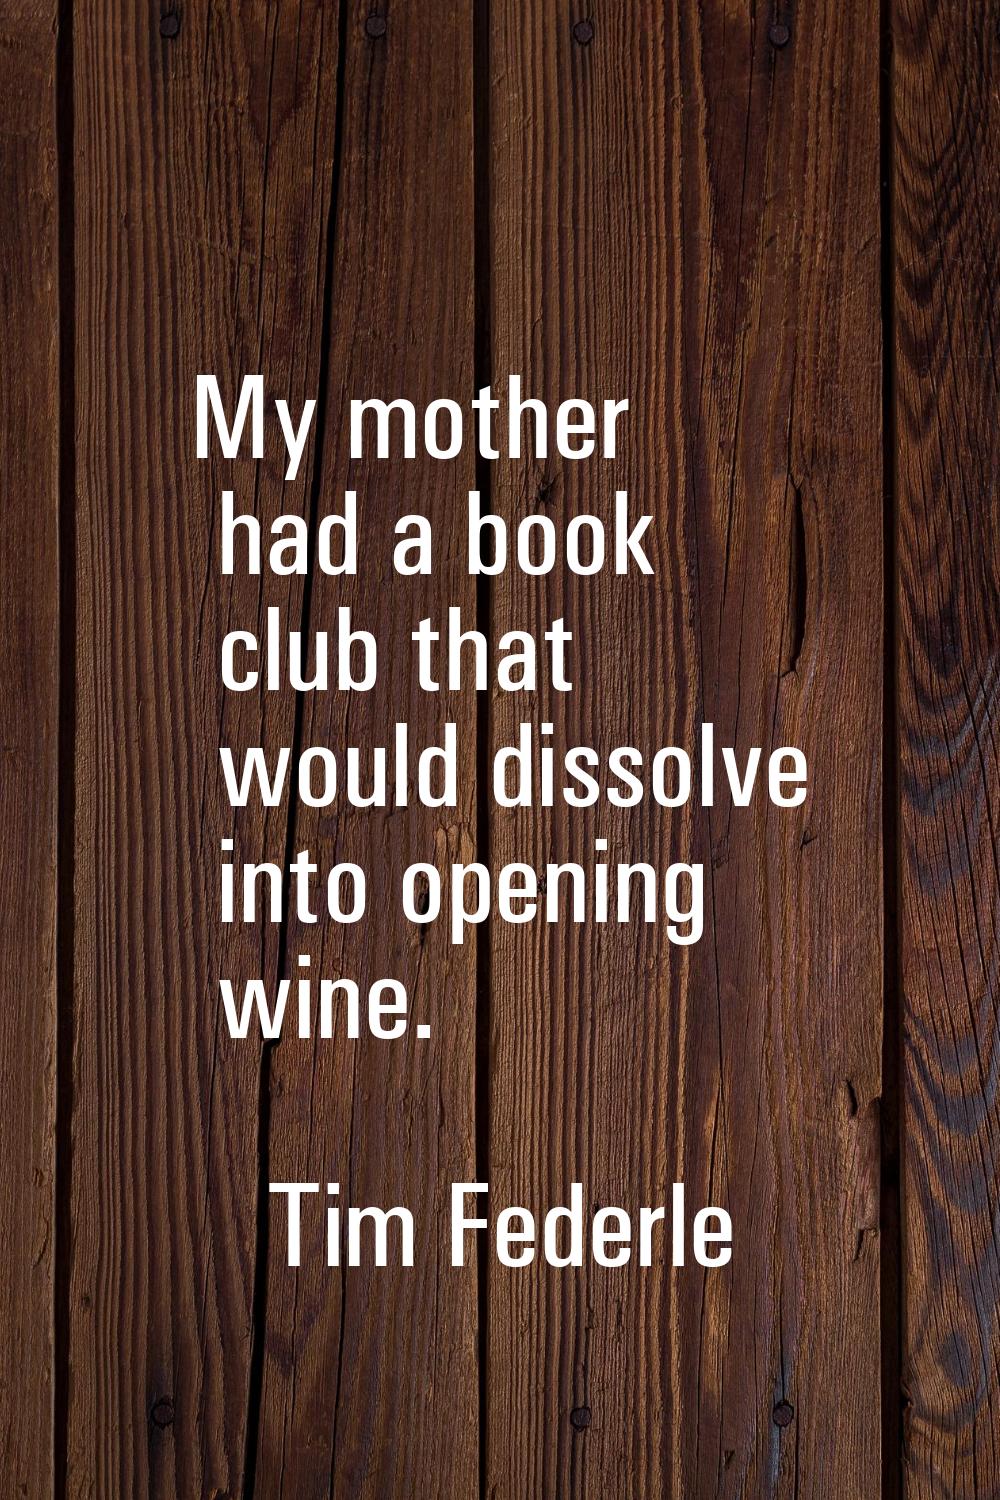 My mother had a book club that would dissolve into opening wine.